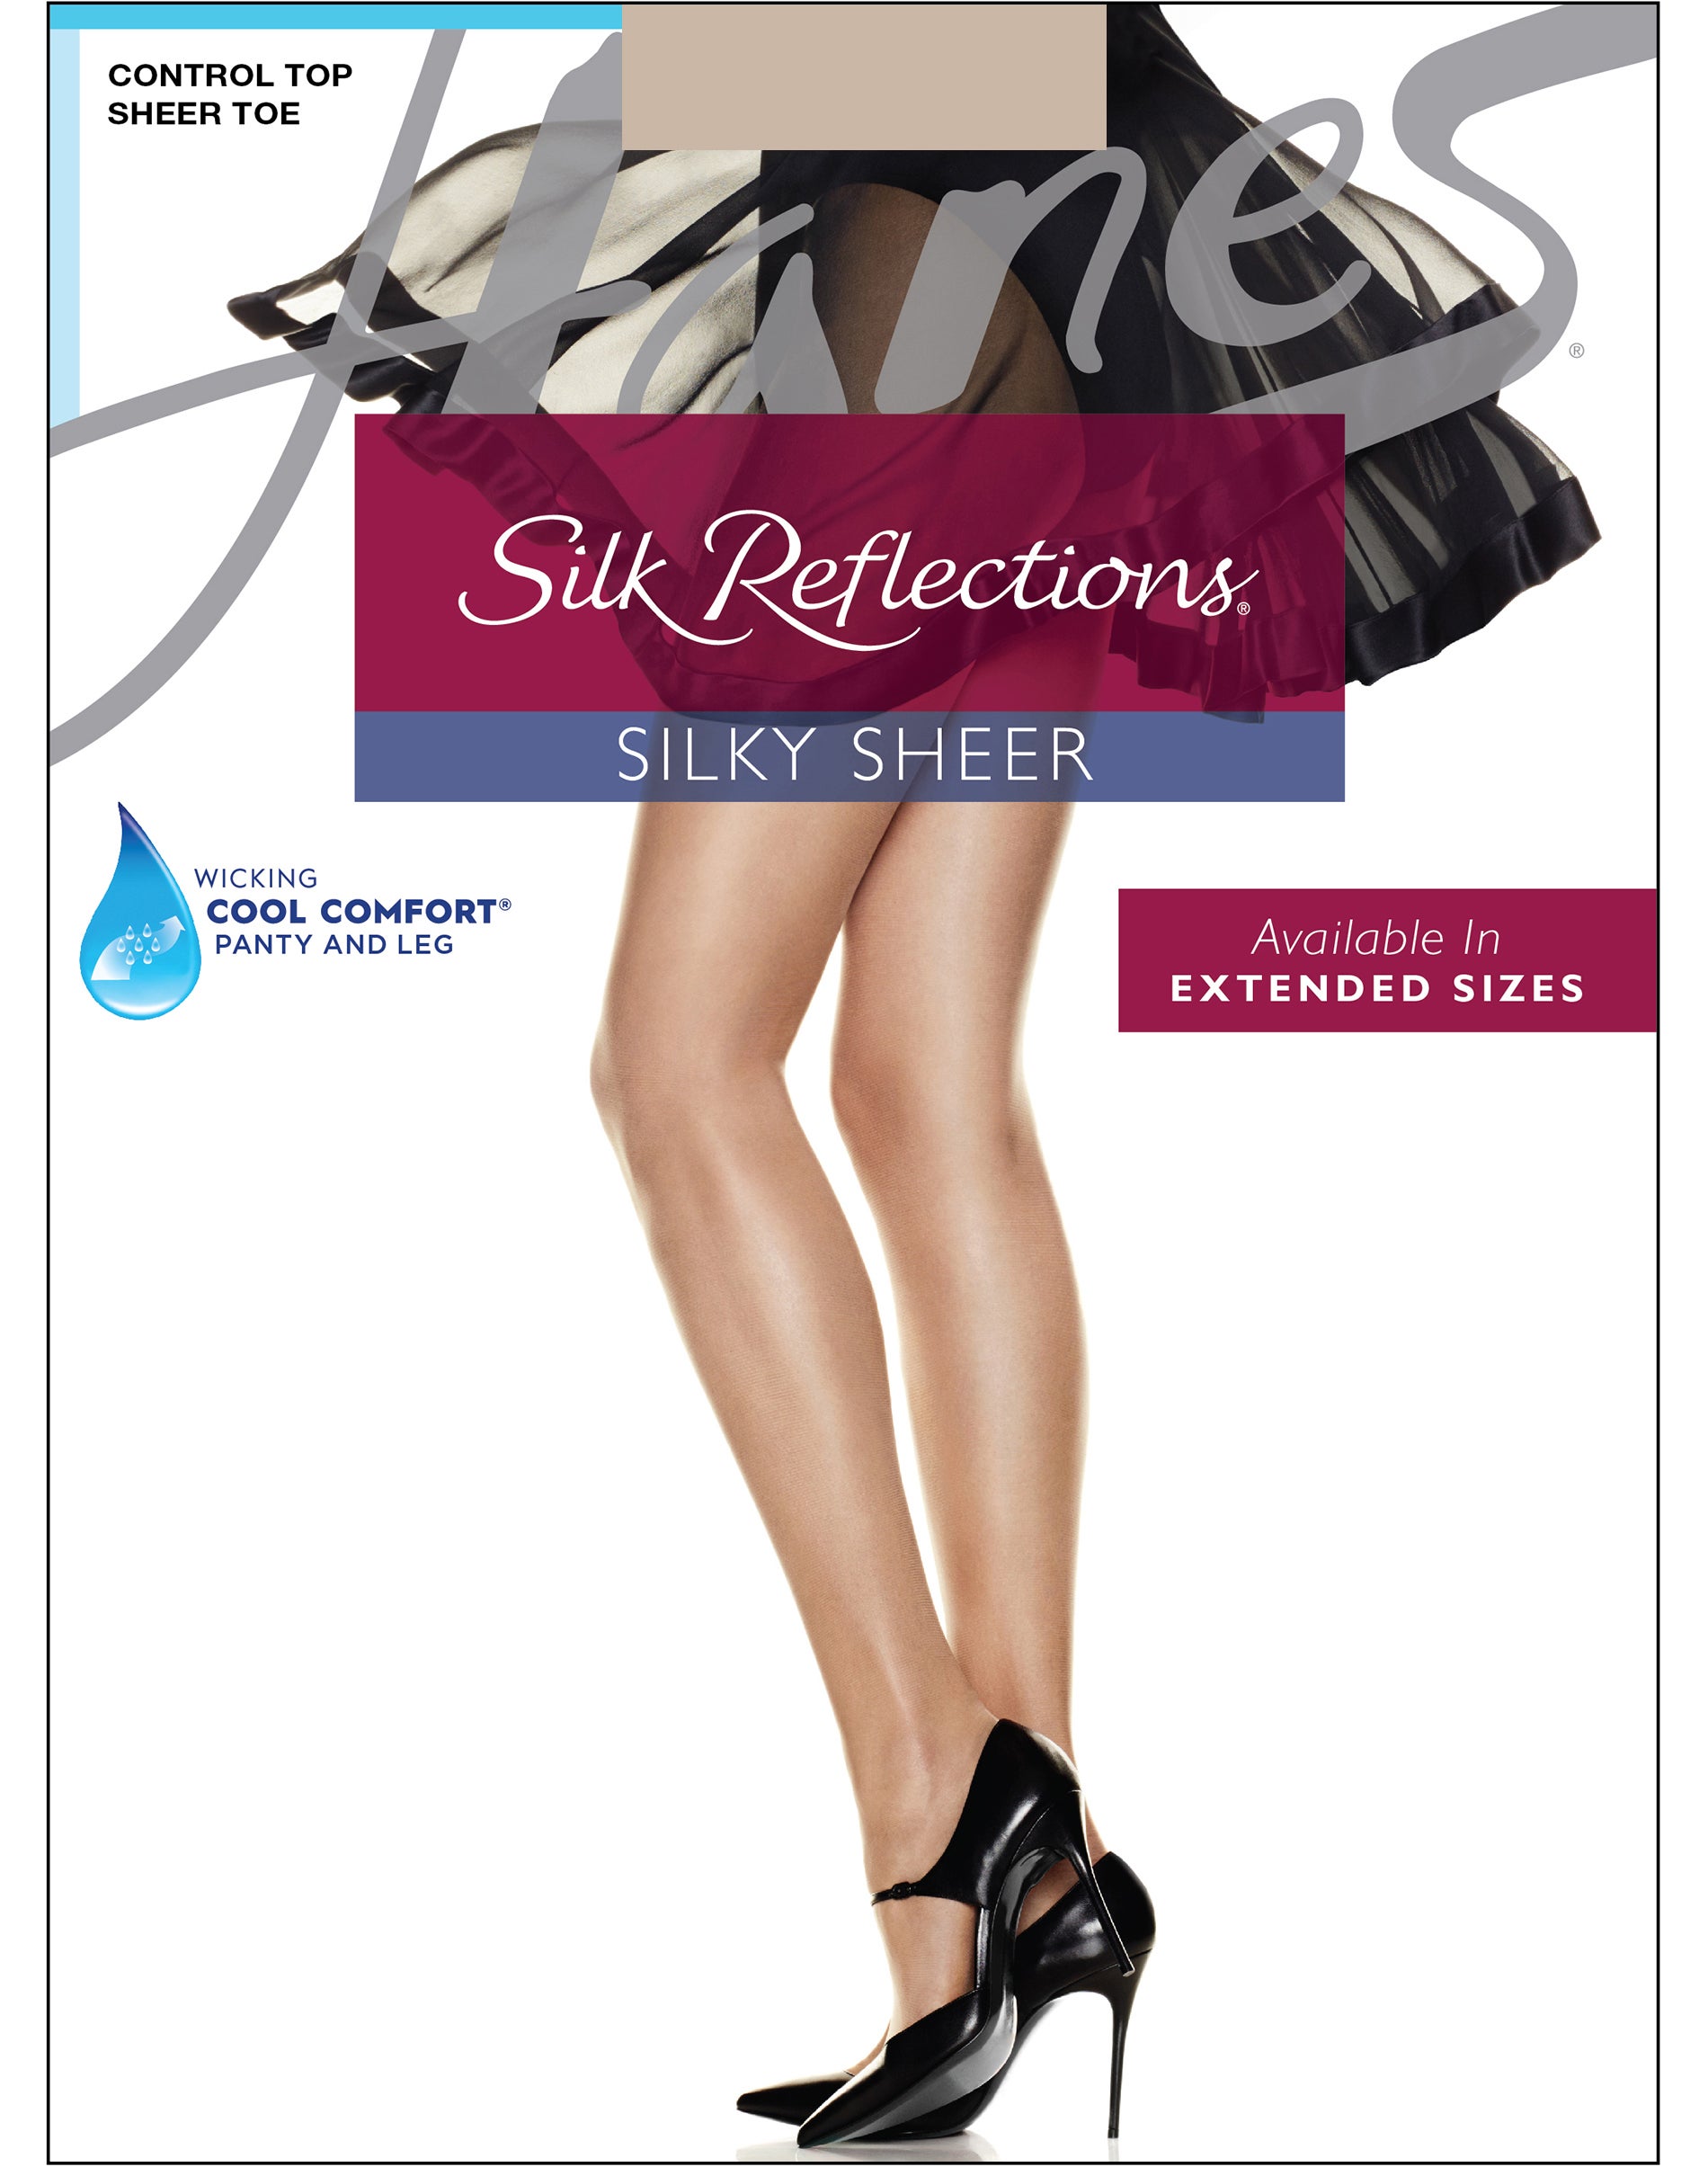 Hanes Silk Reflections Control Top, Sandalfoot Pantyhose 4-Pack